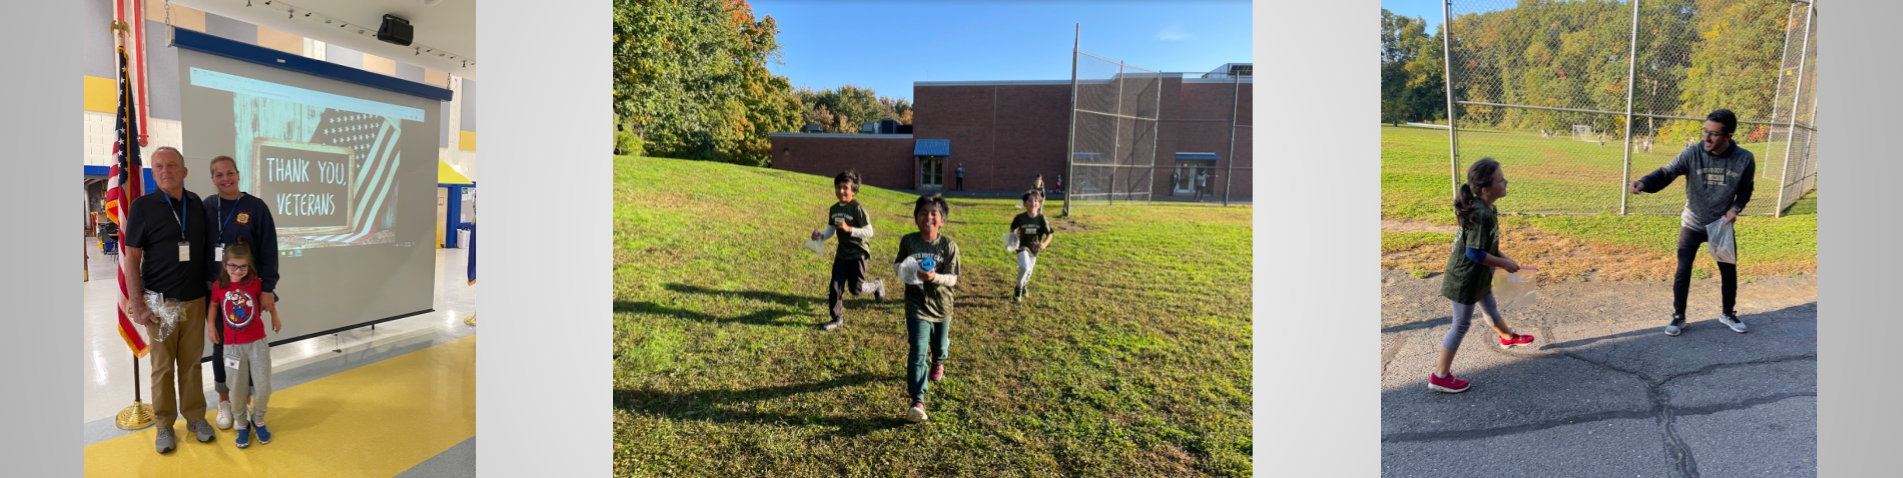 Students participating in Veterans Day activities (fun run)